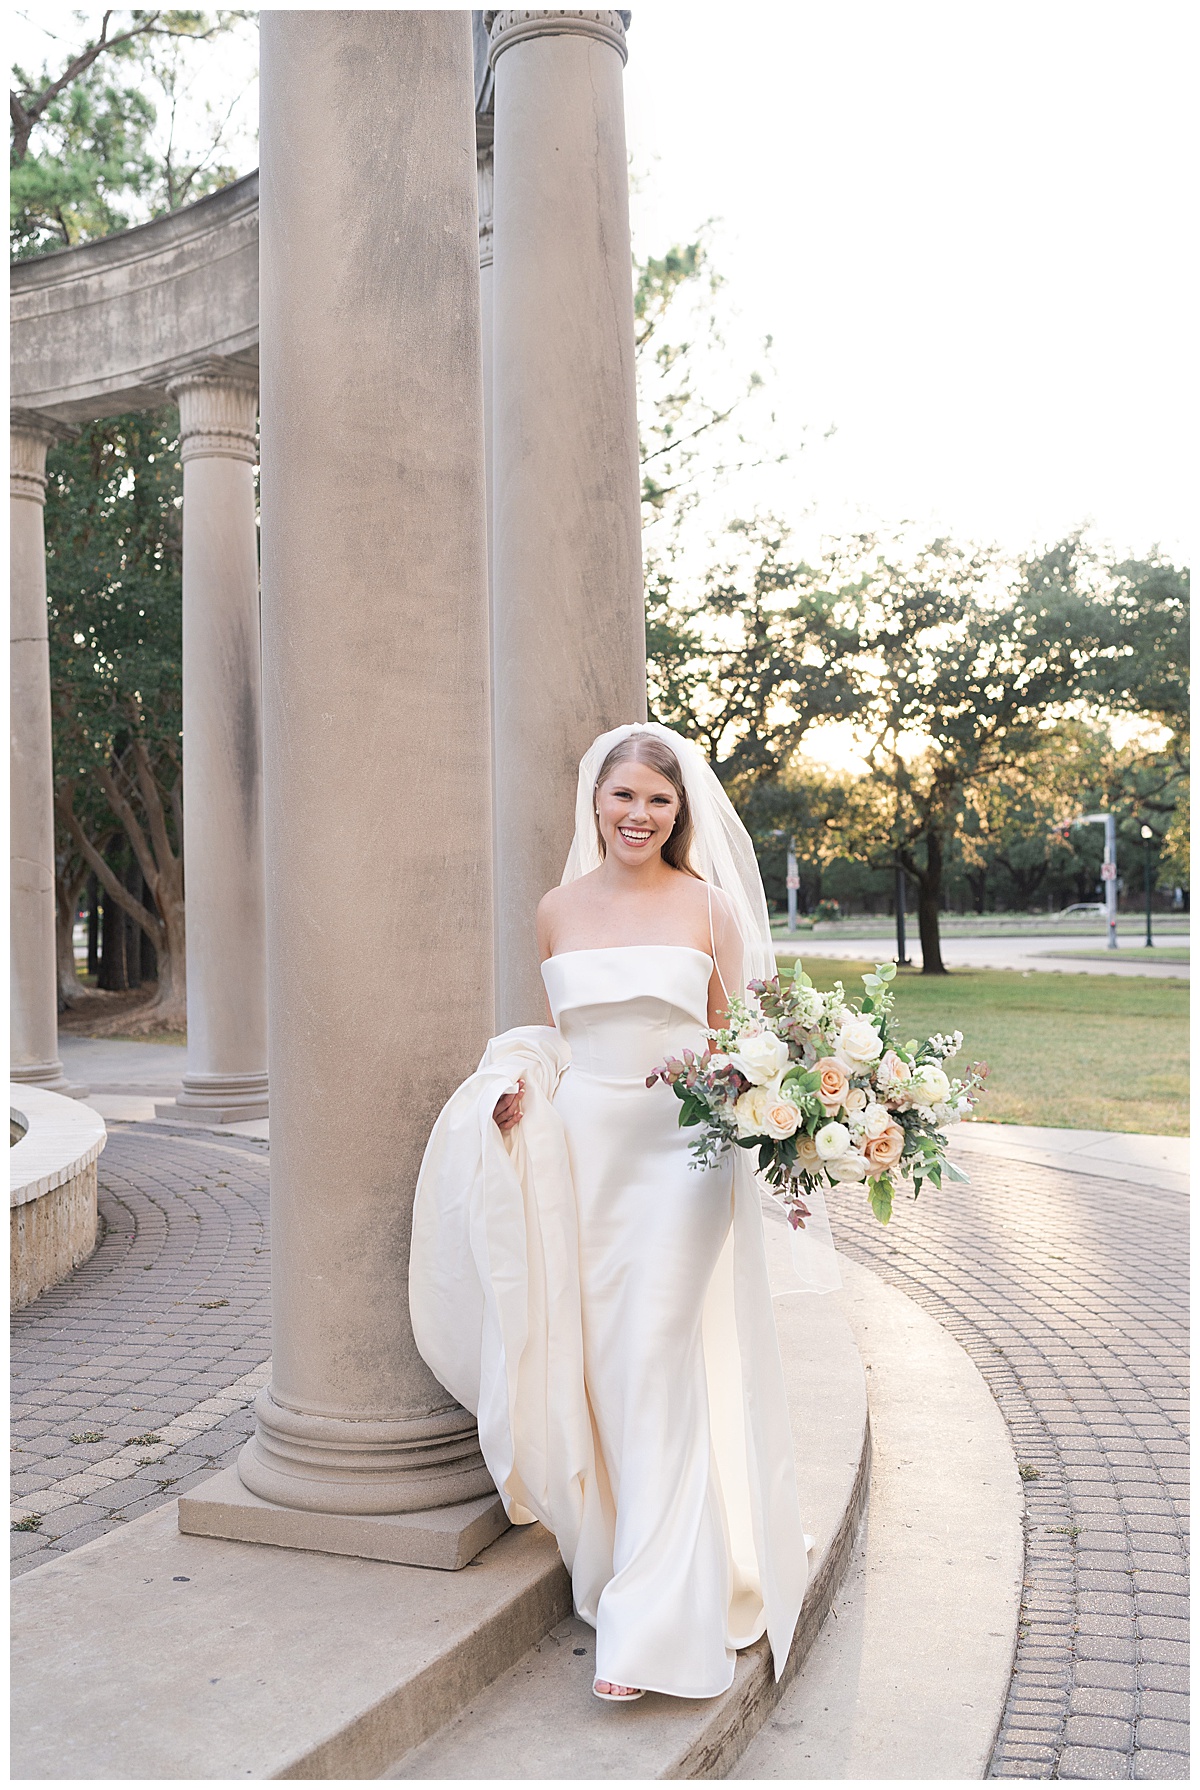 Happy bride walks around after Stunning Bridal Portraits at The Creative Chateau